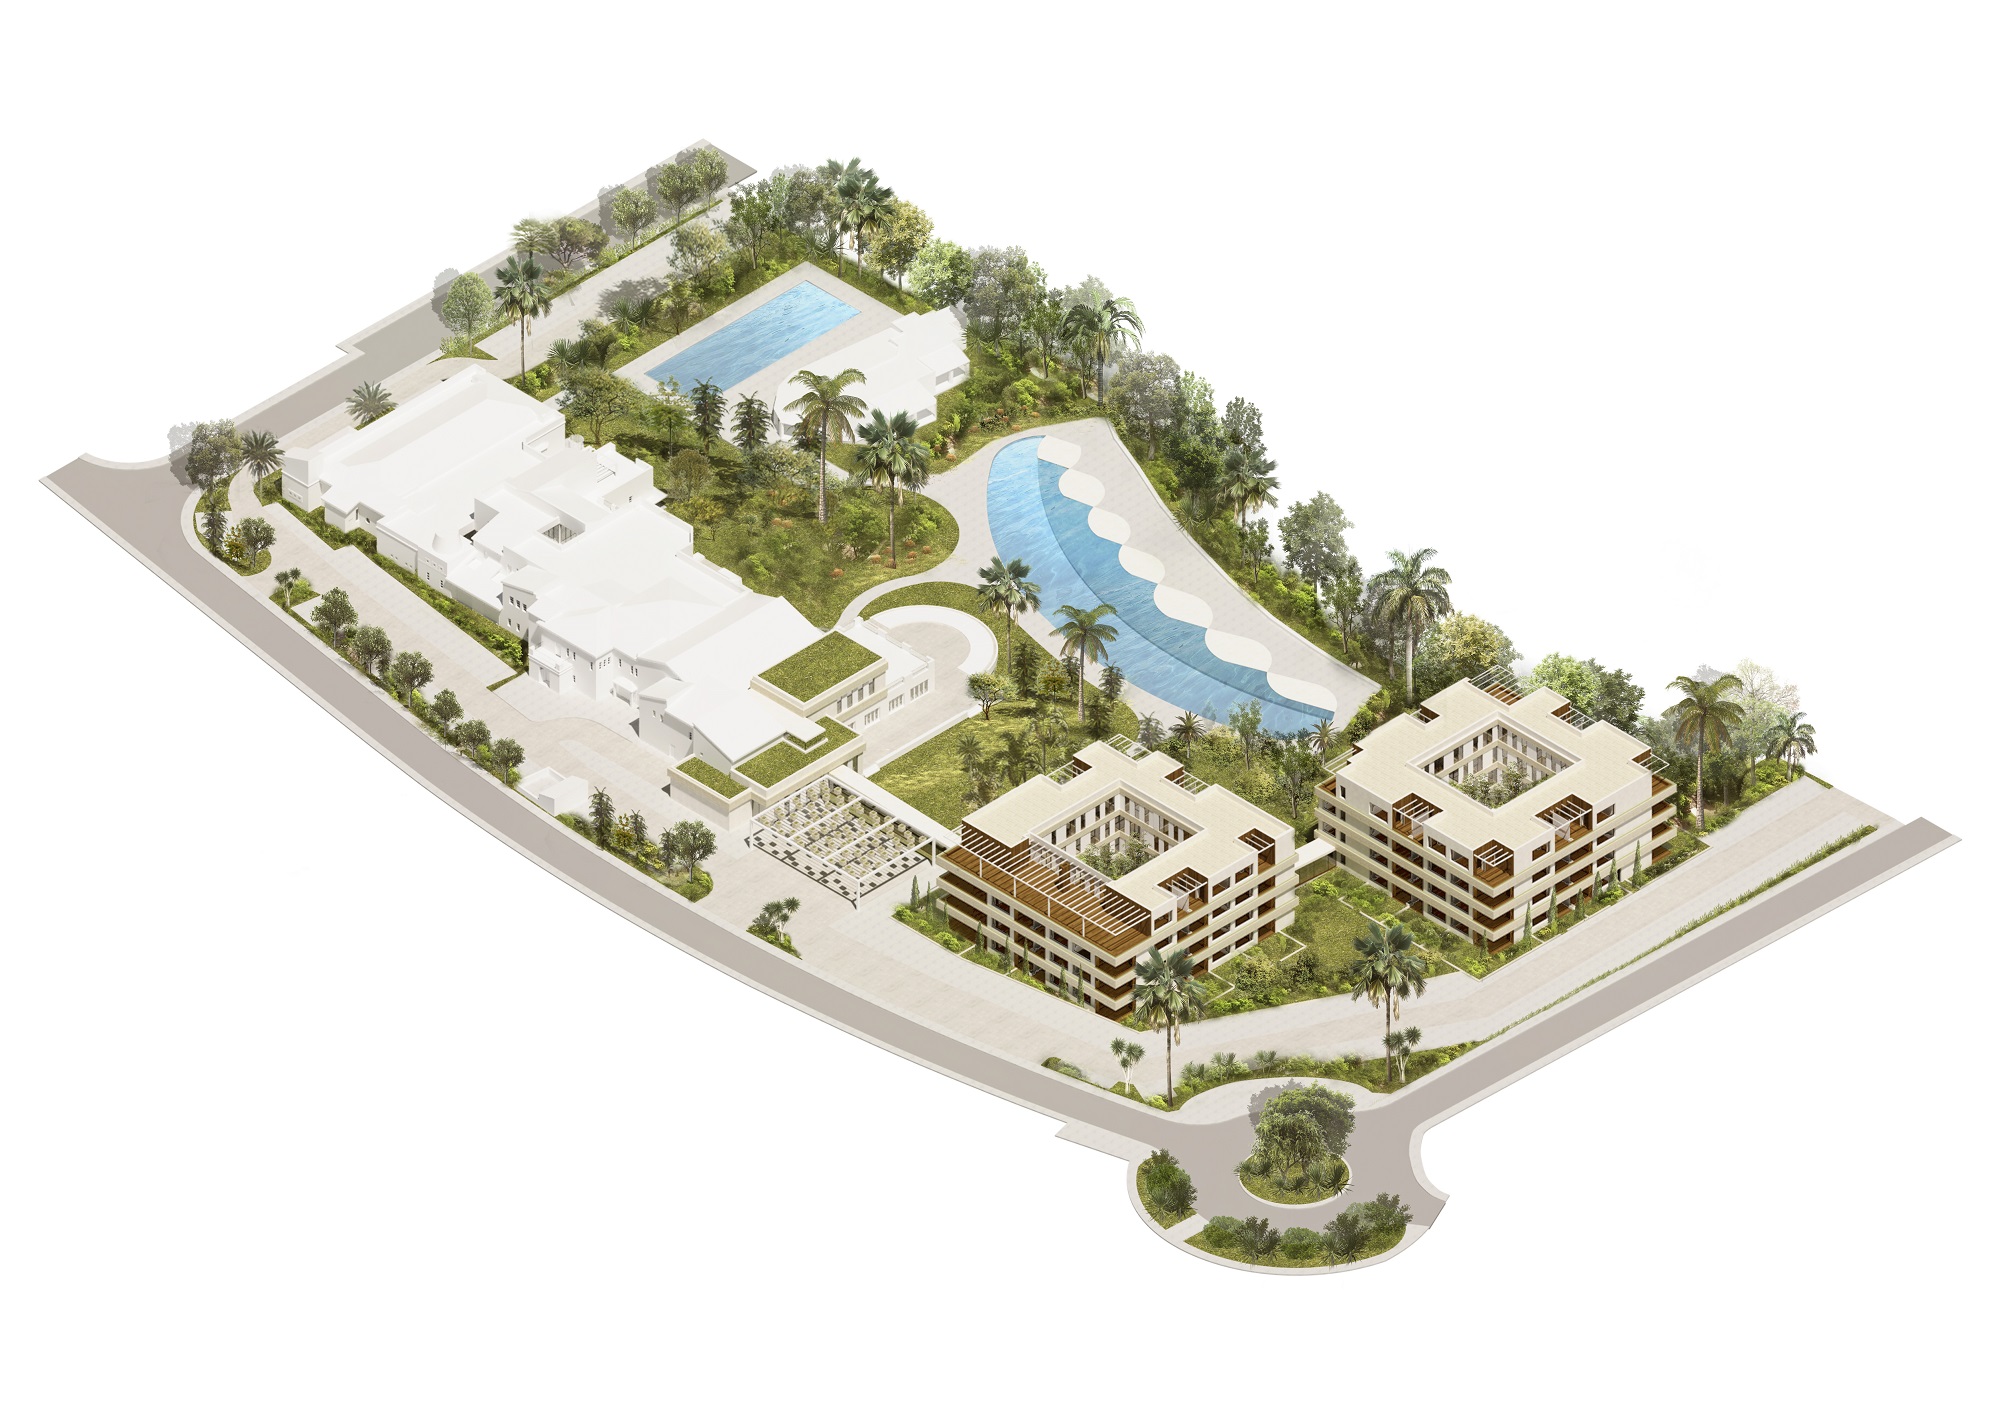 Scheduled to open in 2022, the Kimpton Mallorca will operate under a management agreement with Calvia Country Club S.A. Click to enlarge.